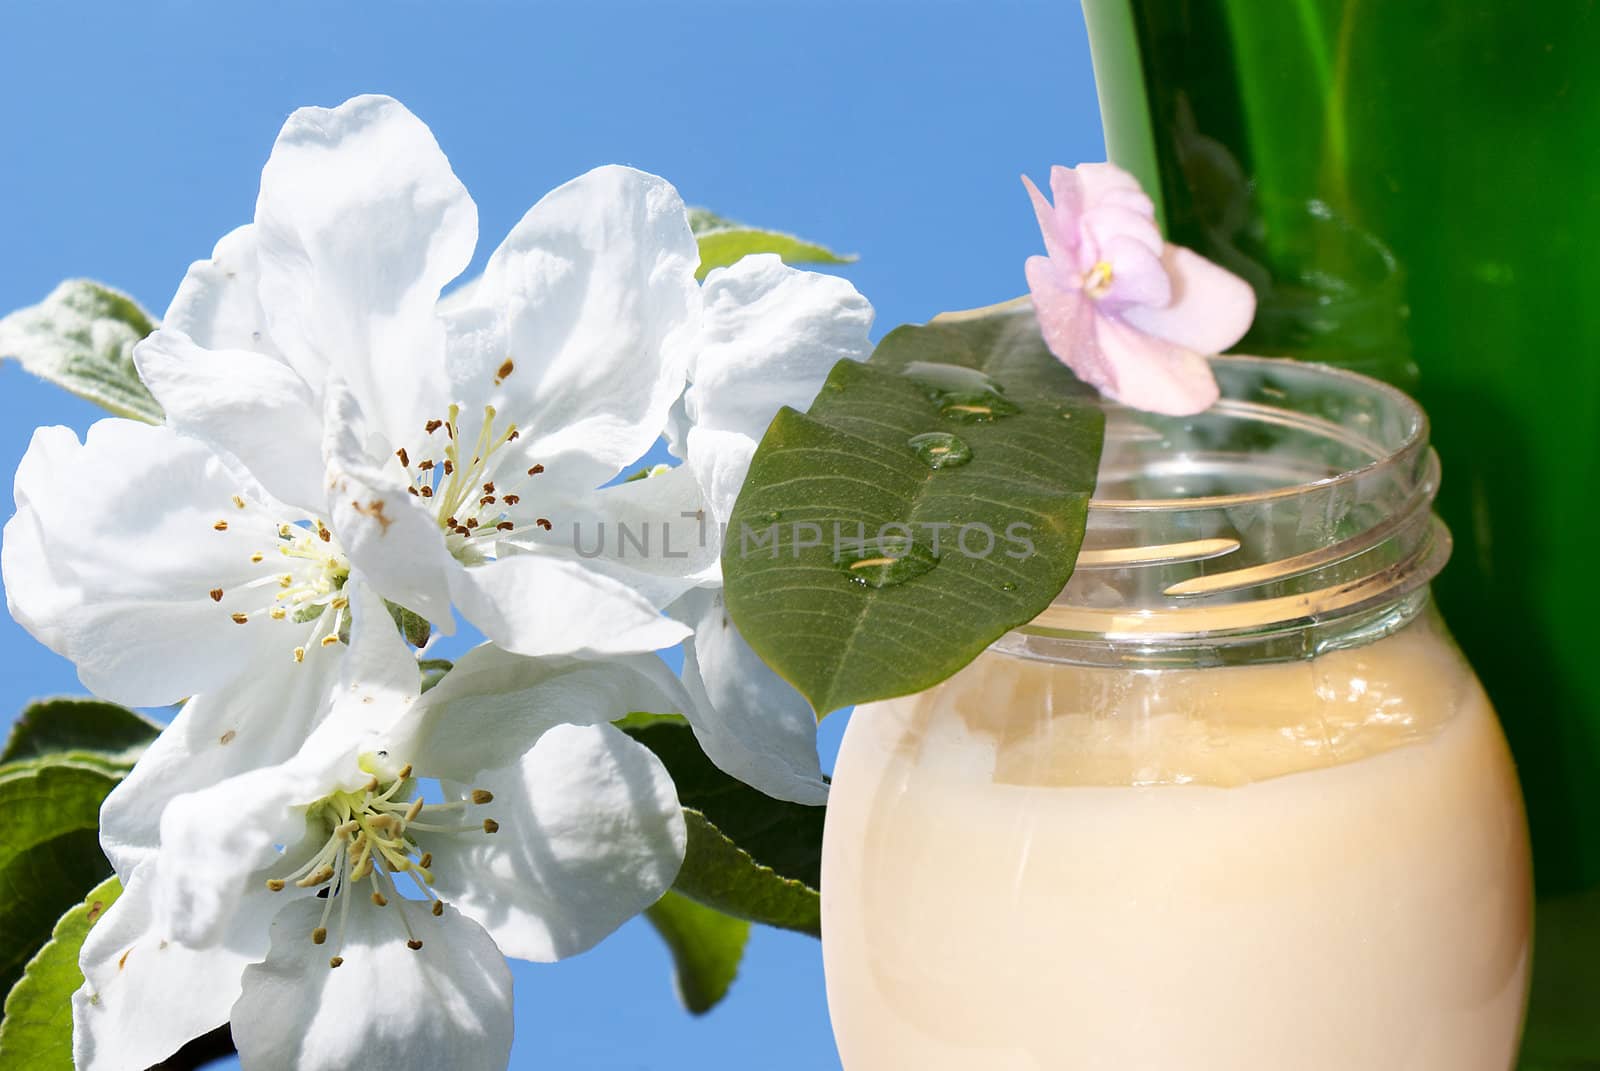 Female cream for care of a skin from natural curative plants and flowers